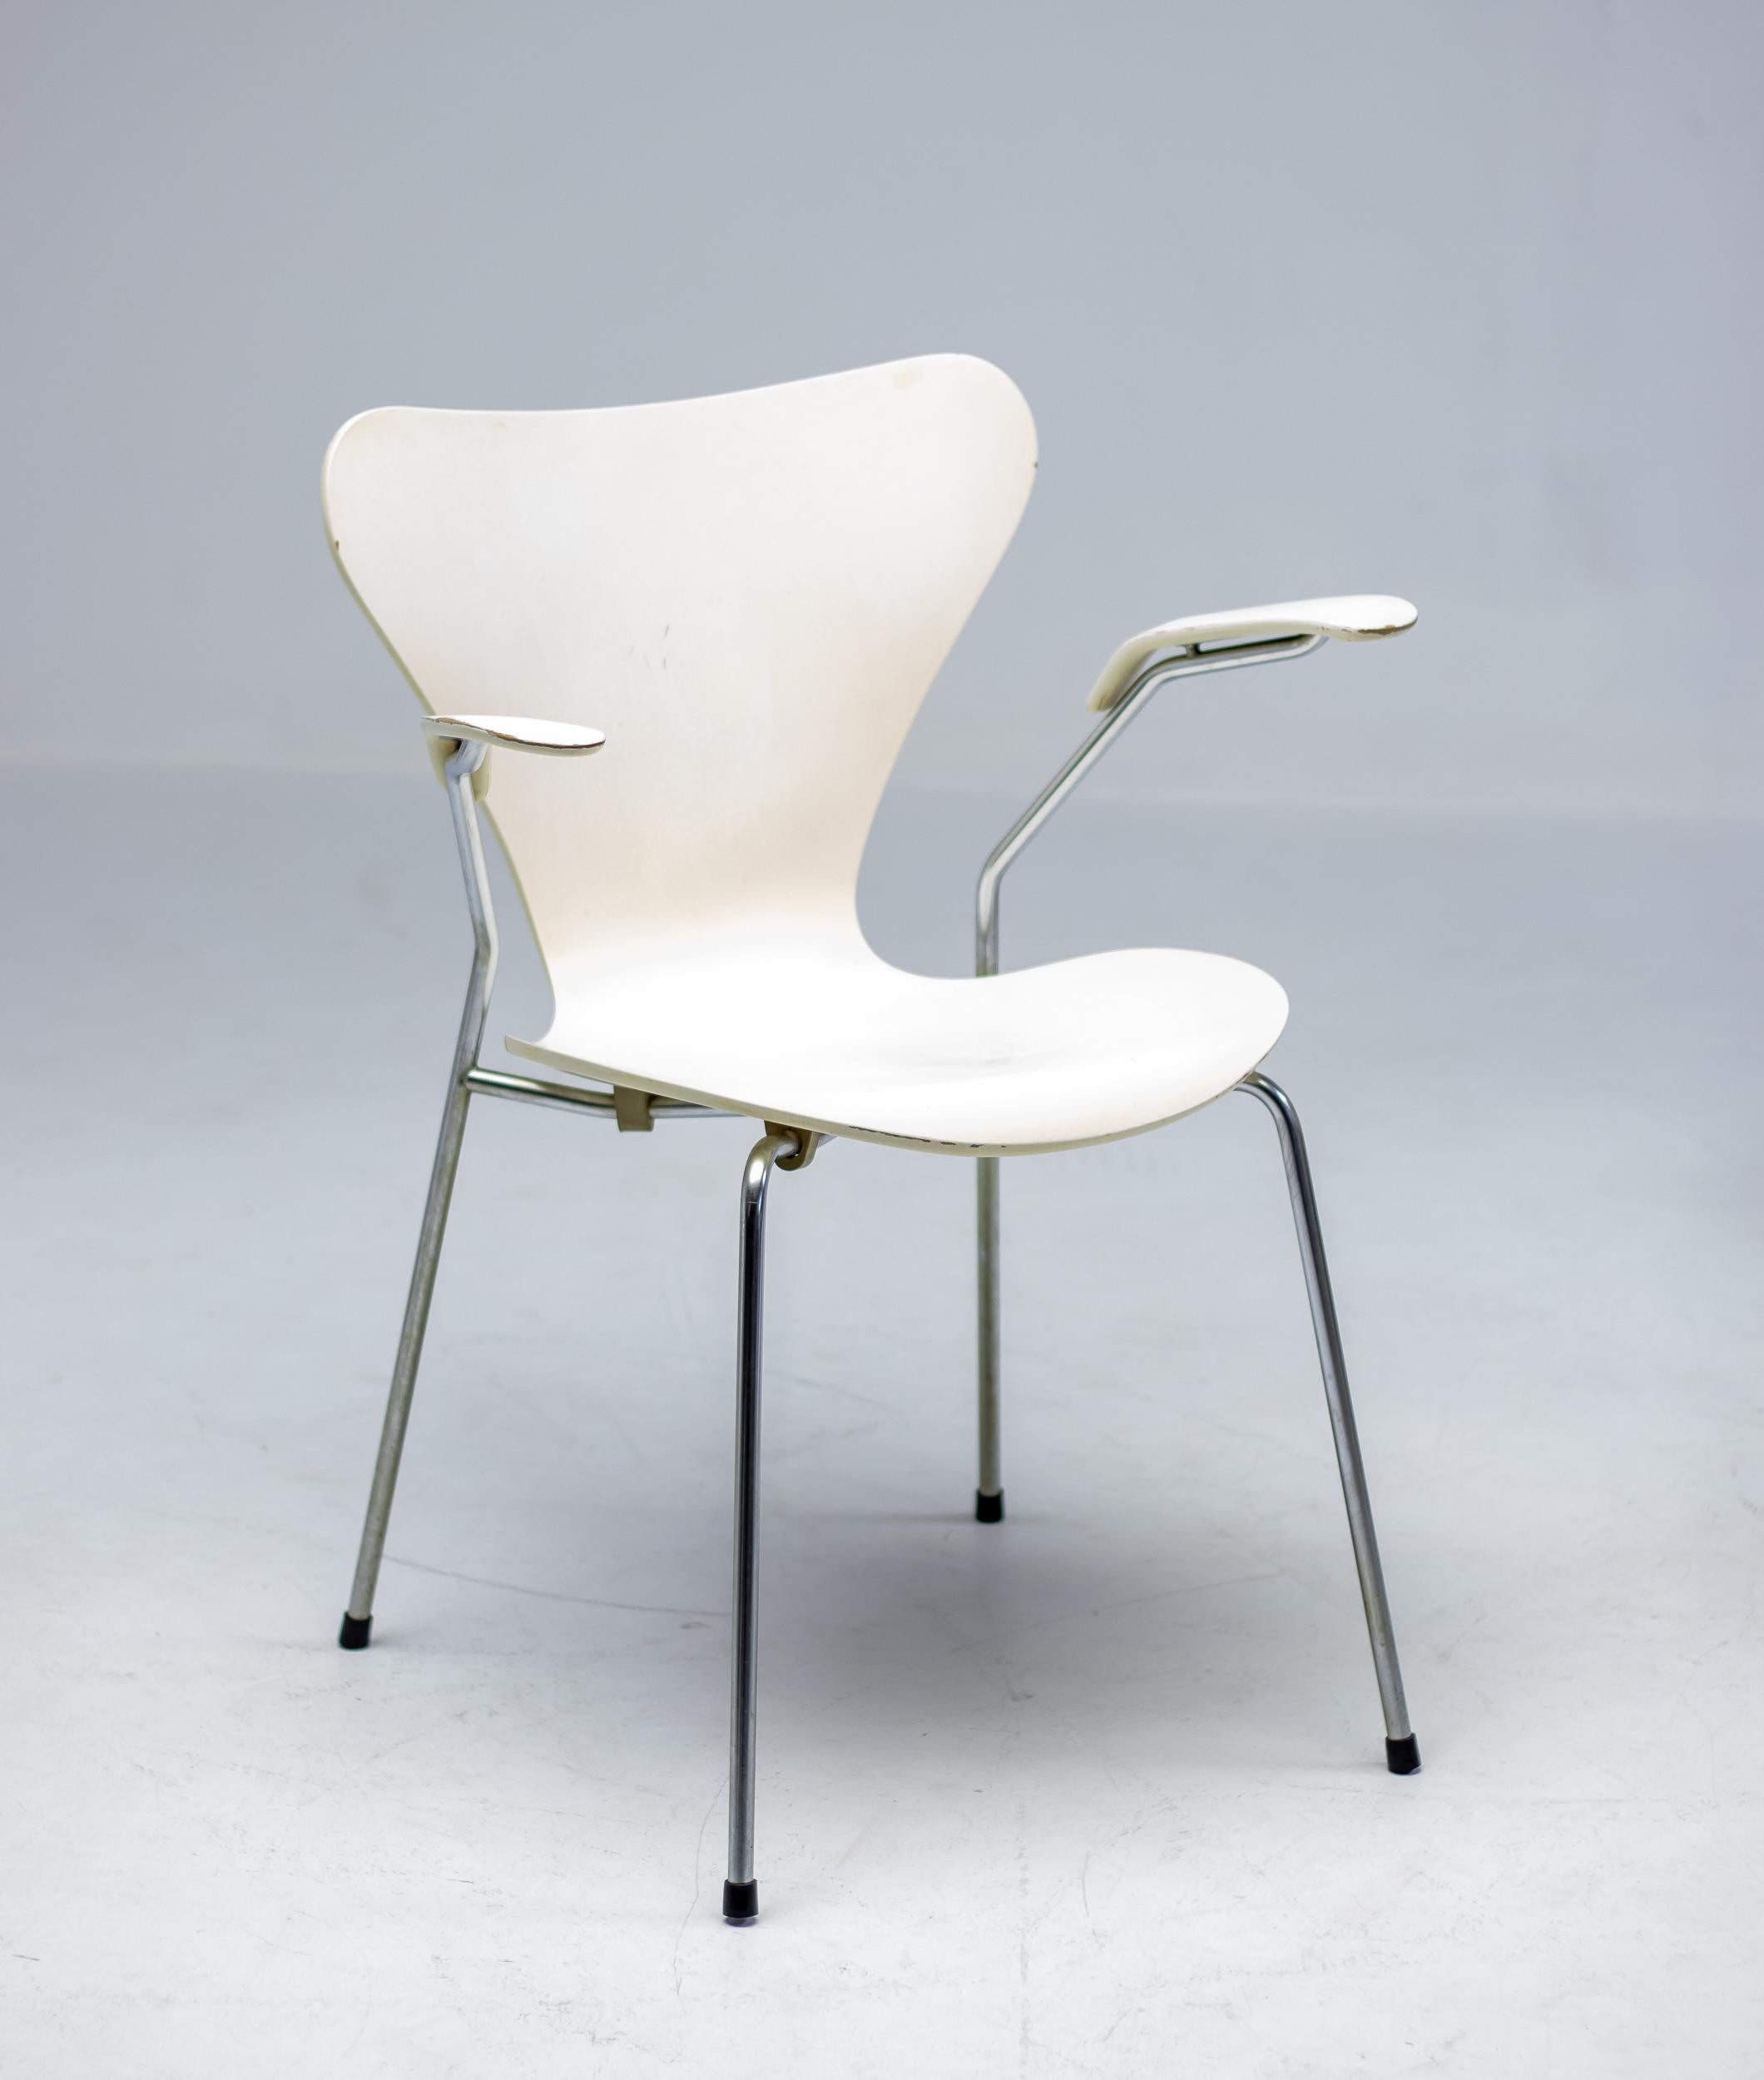 Matching set of 6 arm chairs model 3207 and 2 side chairs model 3107 designed by Arne Jacobsen, produced by Fritz Hansen in Denmark in 1973. Cream colored lacquer with some wear as one would expect from a set of chairs after 50 years of careful